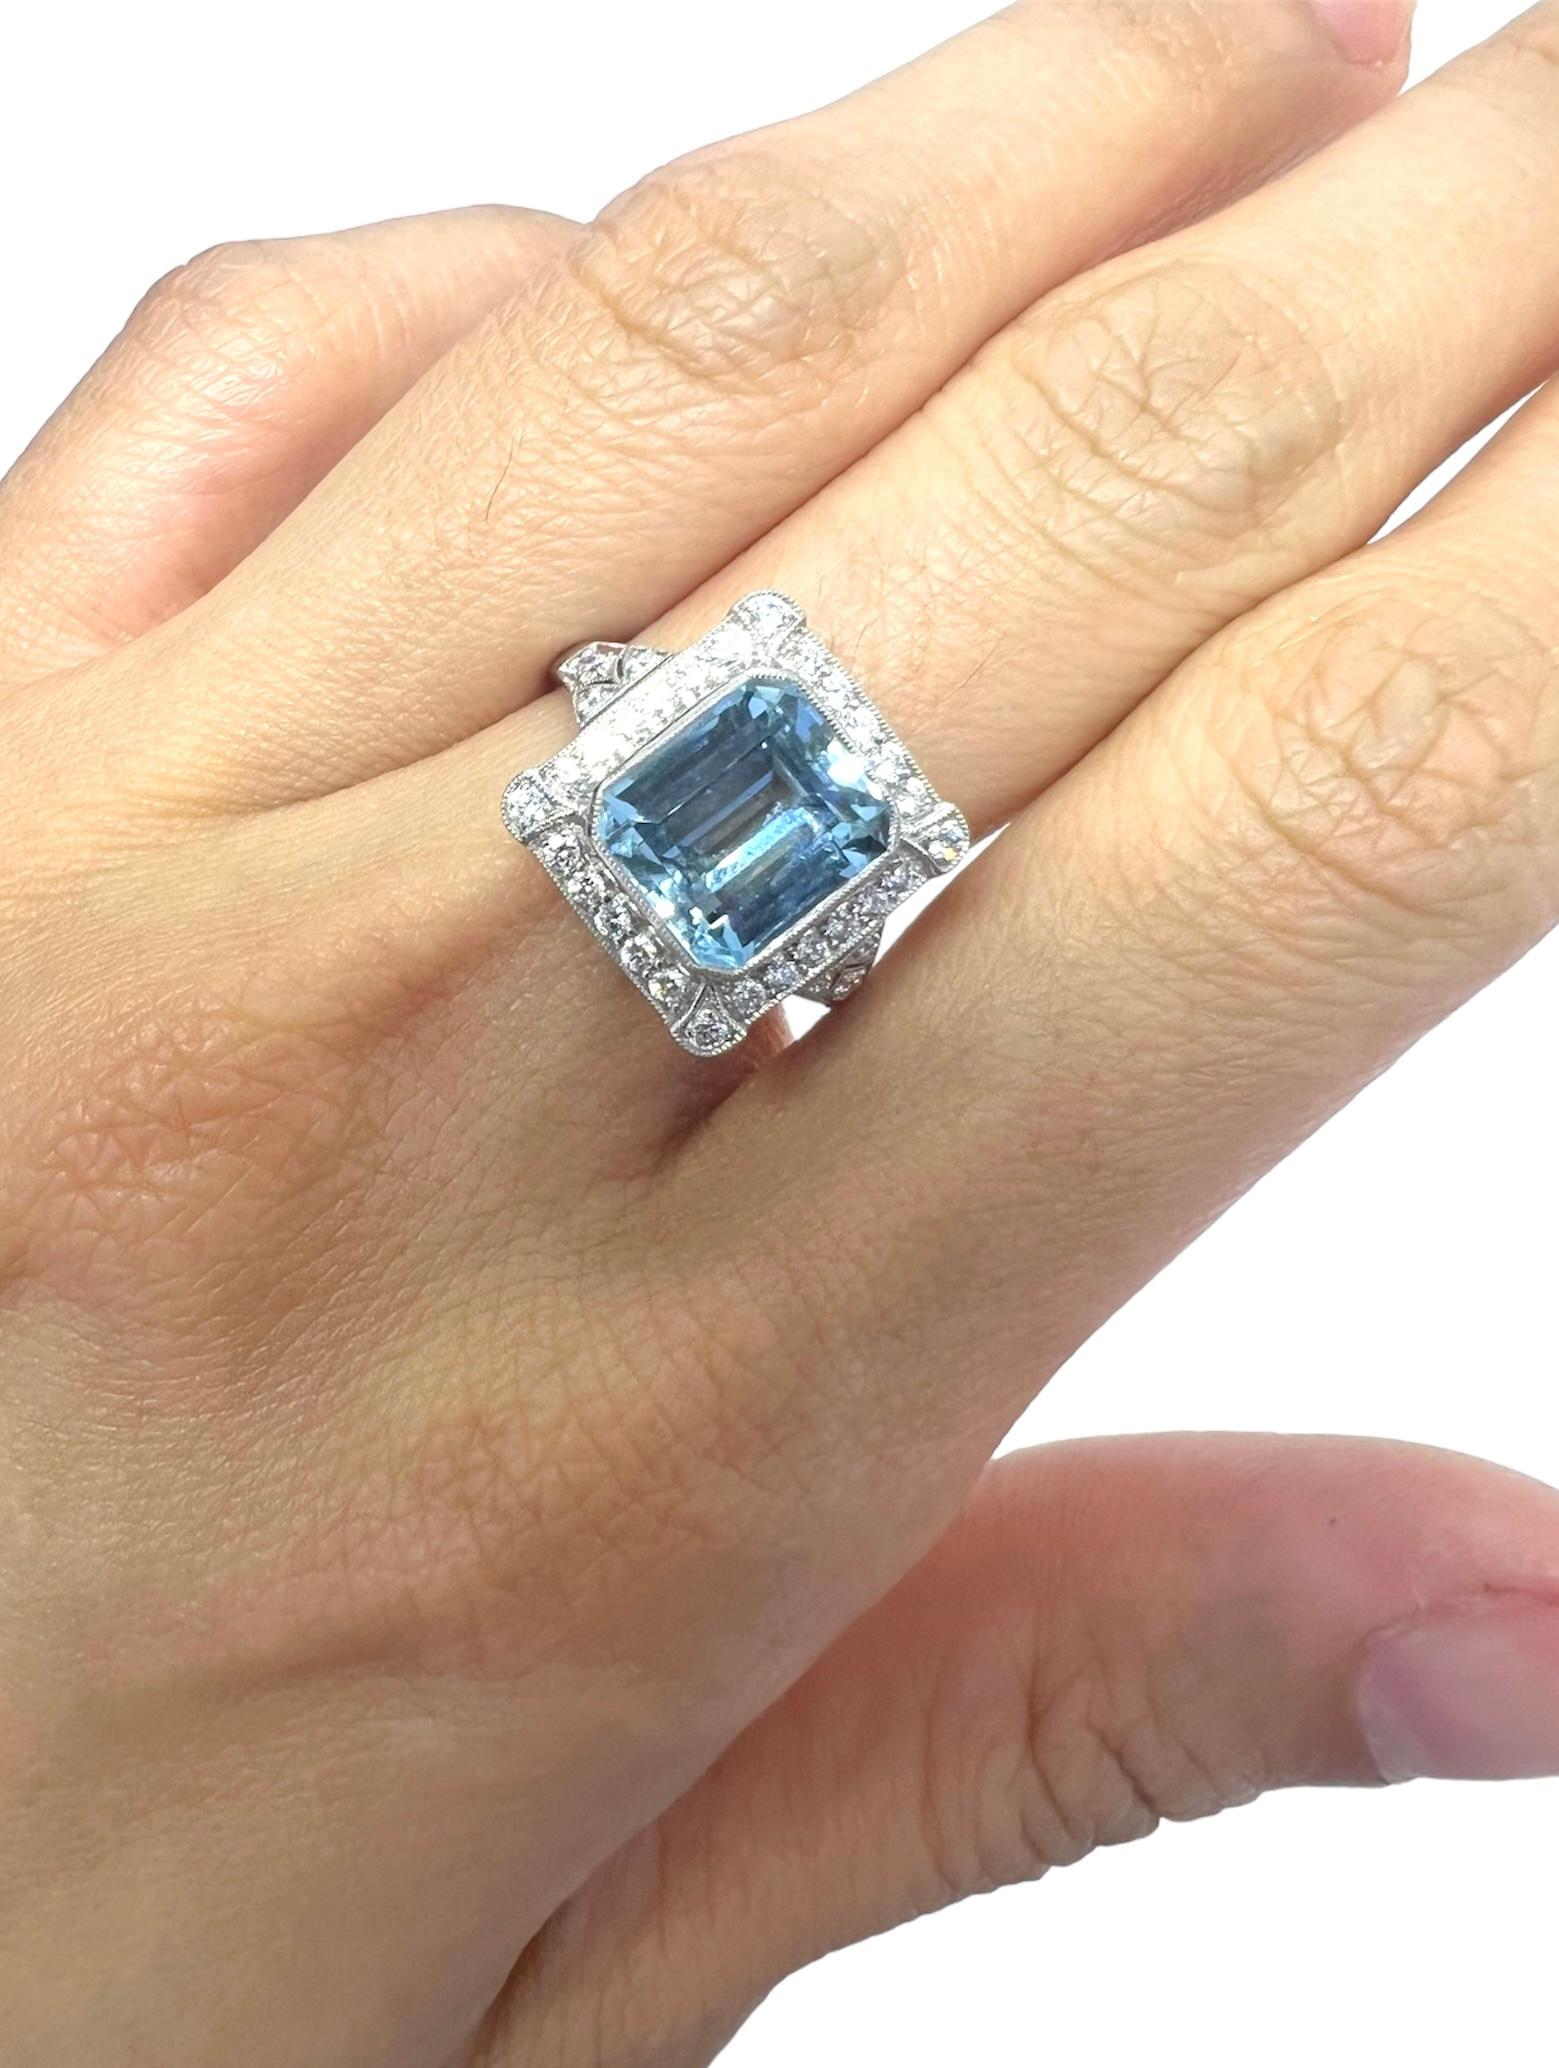 A ring set in platinum with 2.98 carat aquamarine and .34 carat diamond.

Sophia D by Joseph Dardashti LTD has been known worldwide for 35 years and are inspired by classic Art Deco design that merges with modern manufacturing techniques.